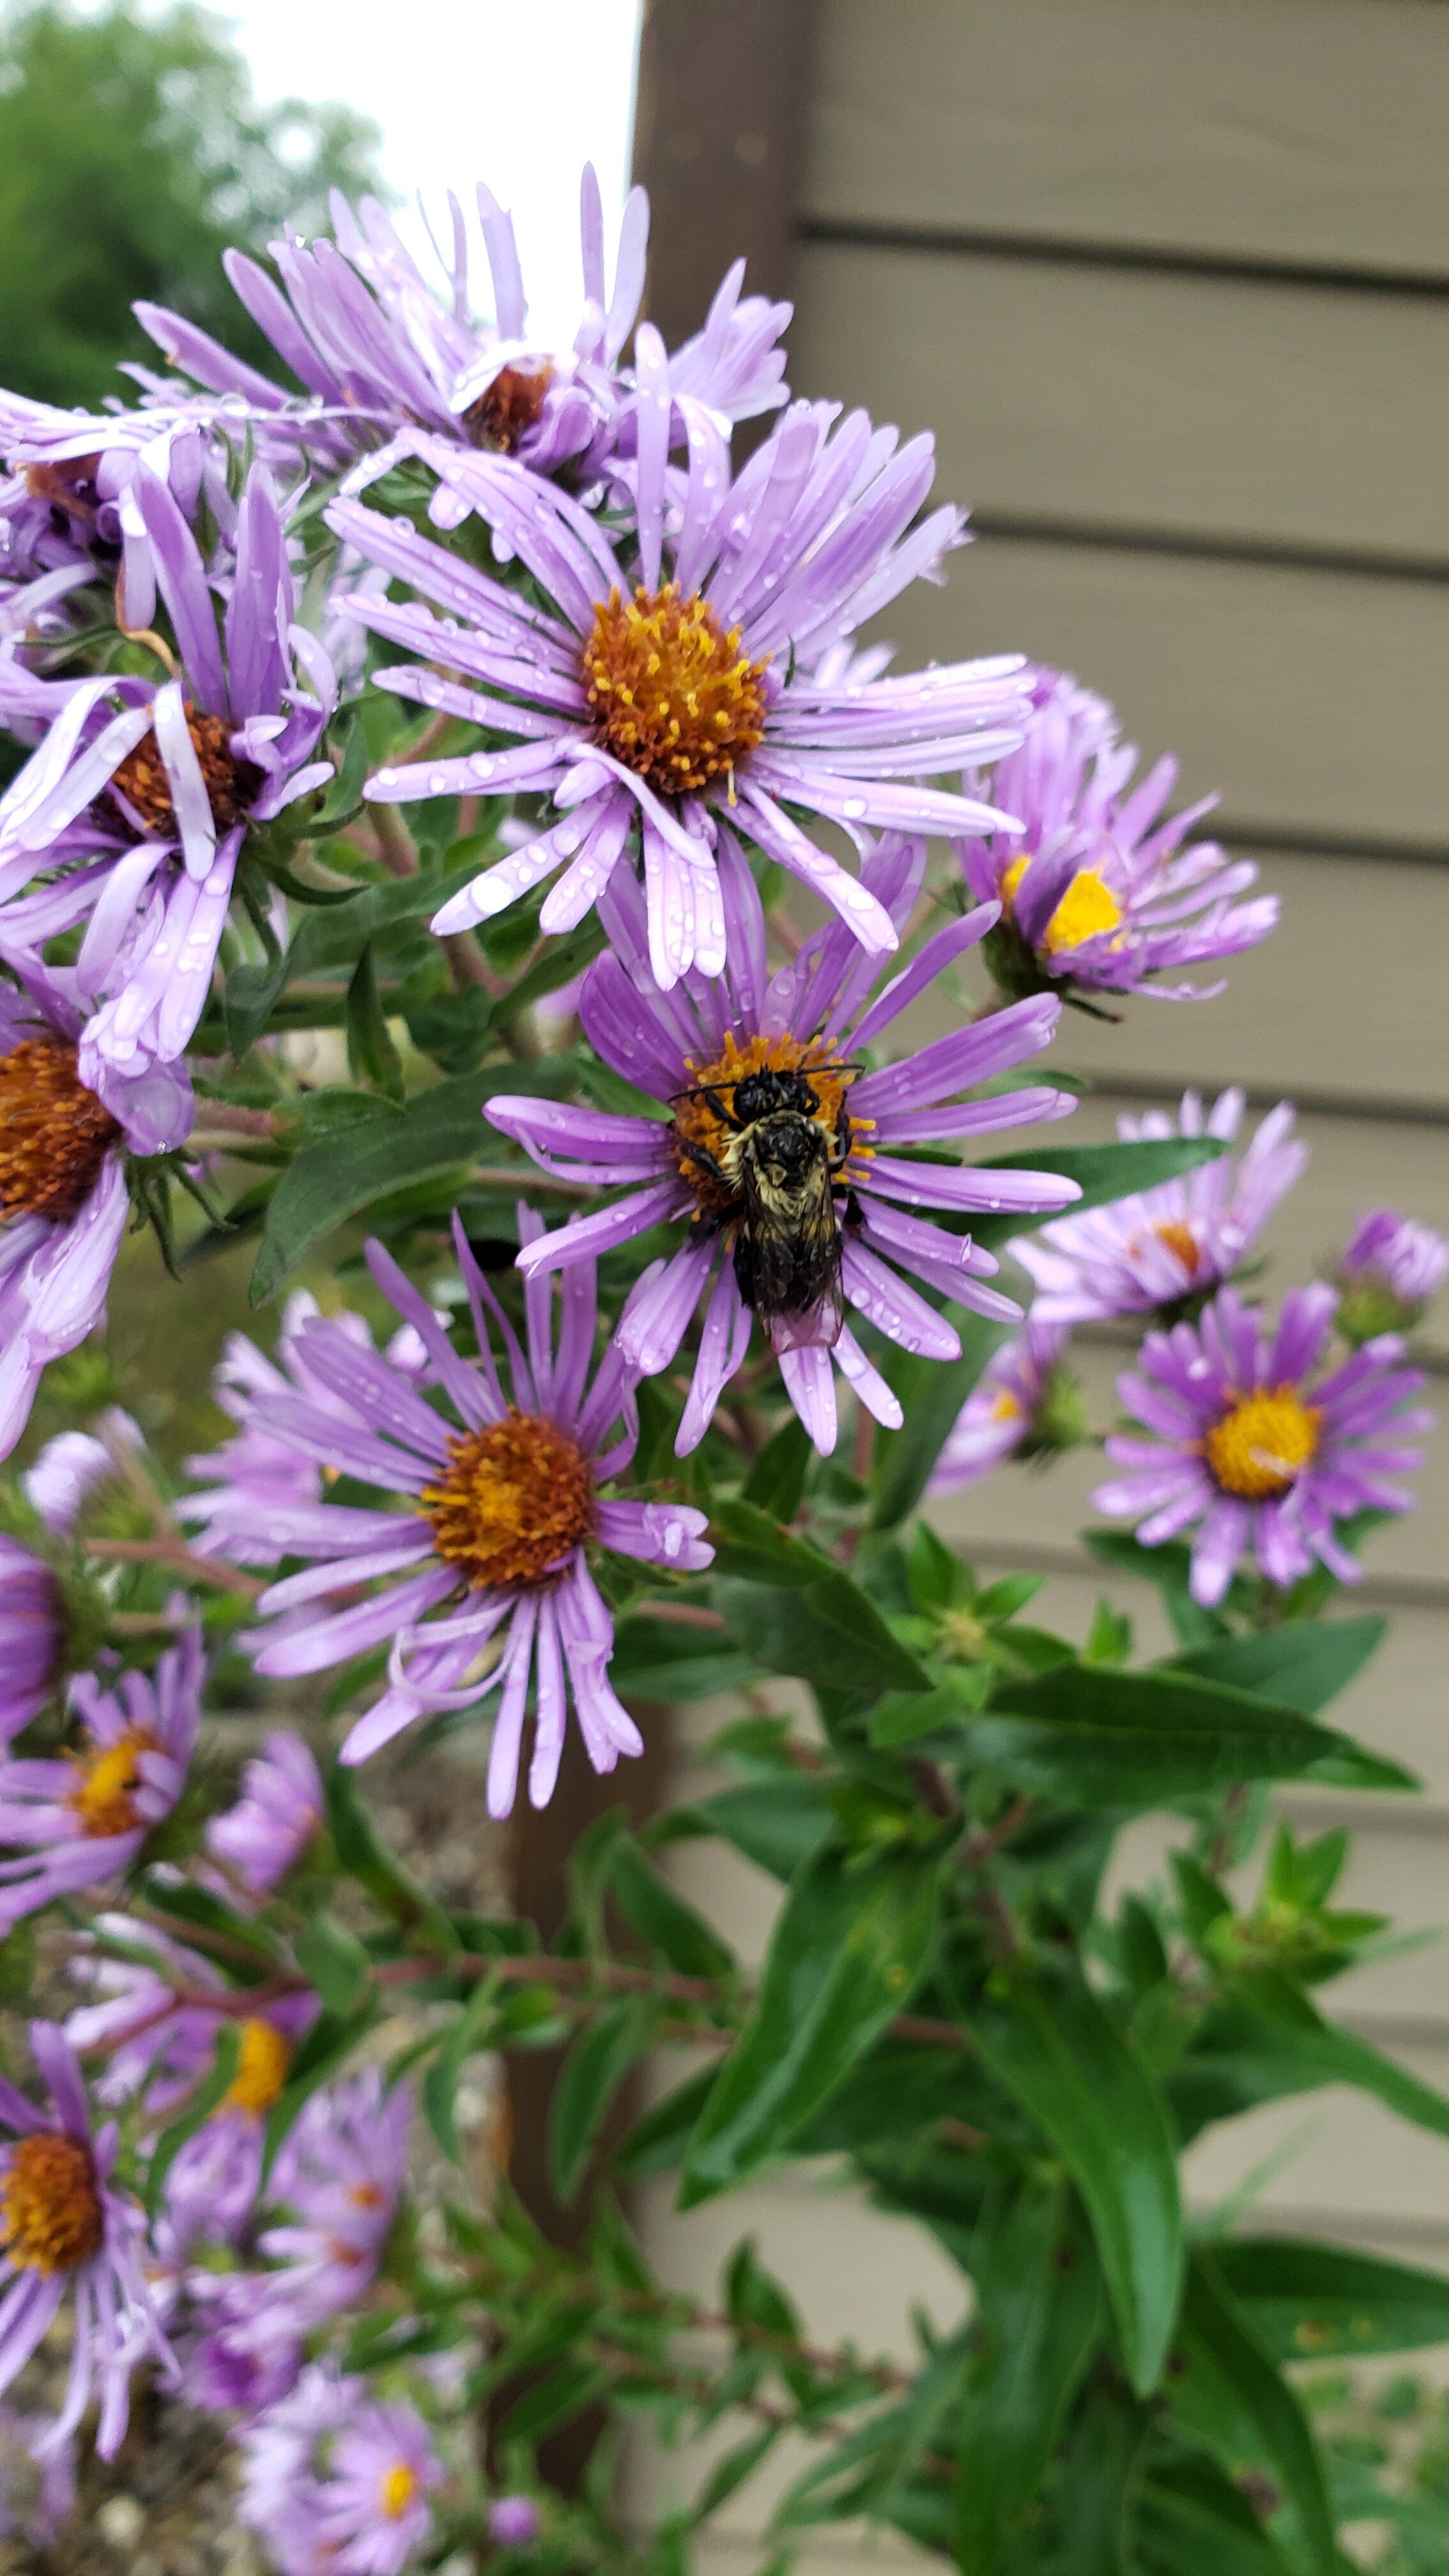 Chilly bee on New England Aster photo by K Grzesiak (Copy)